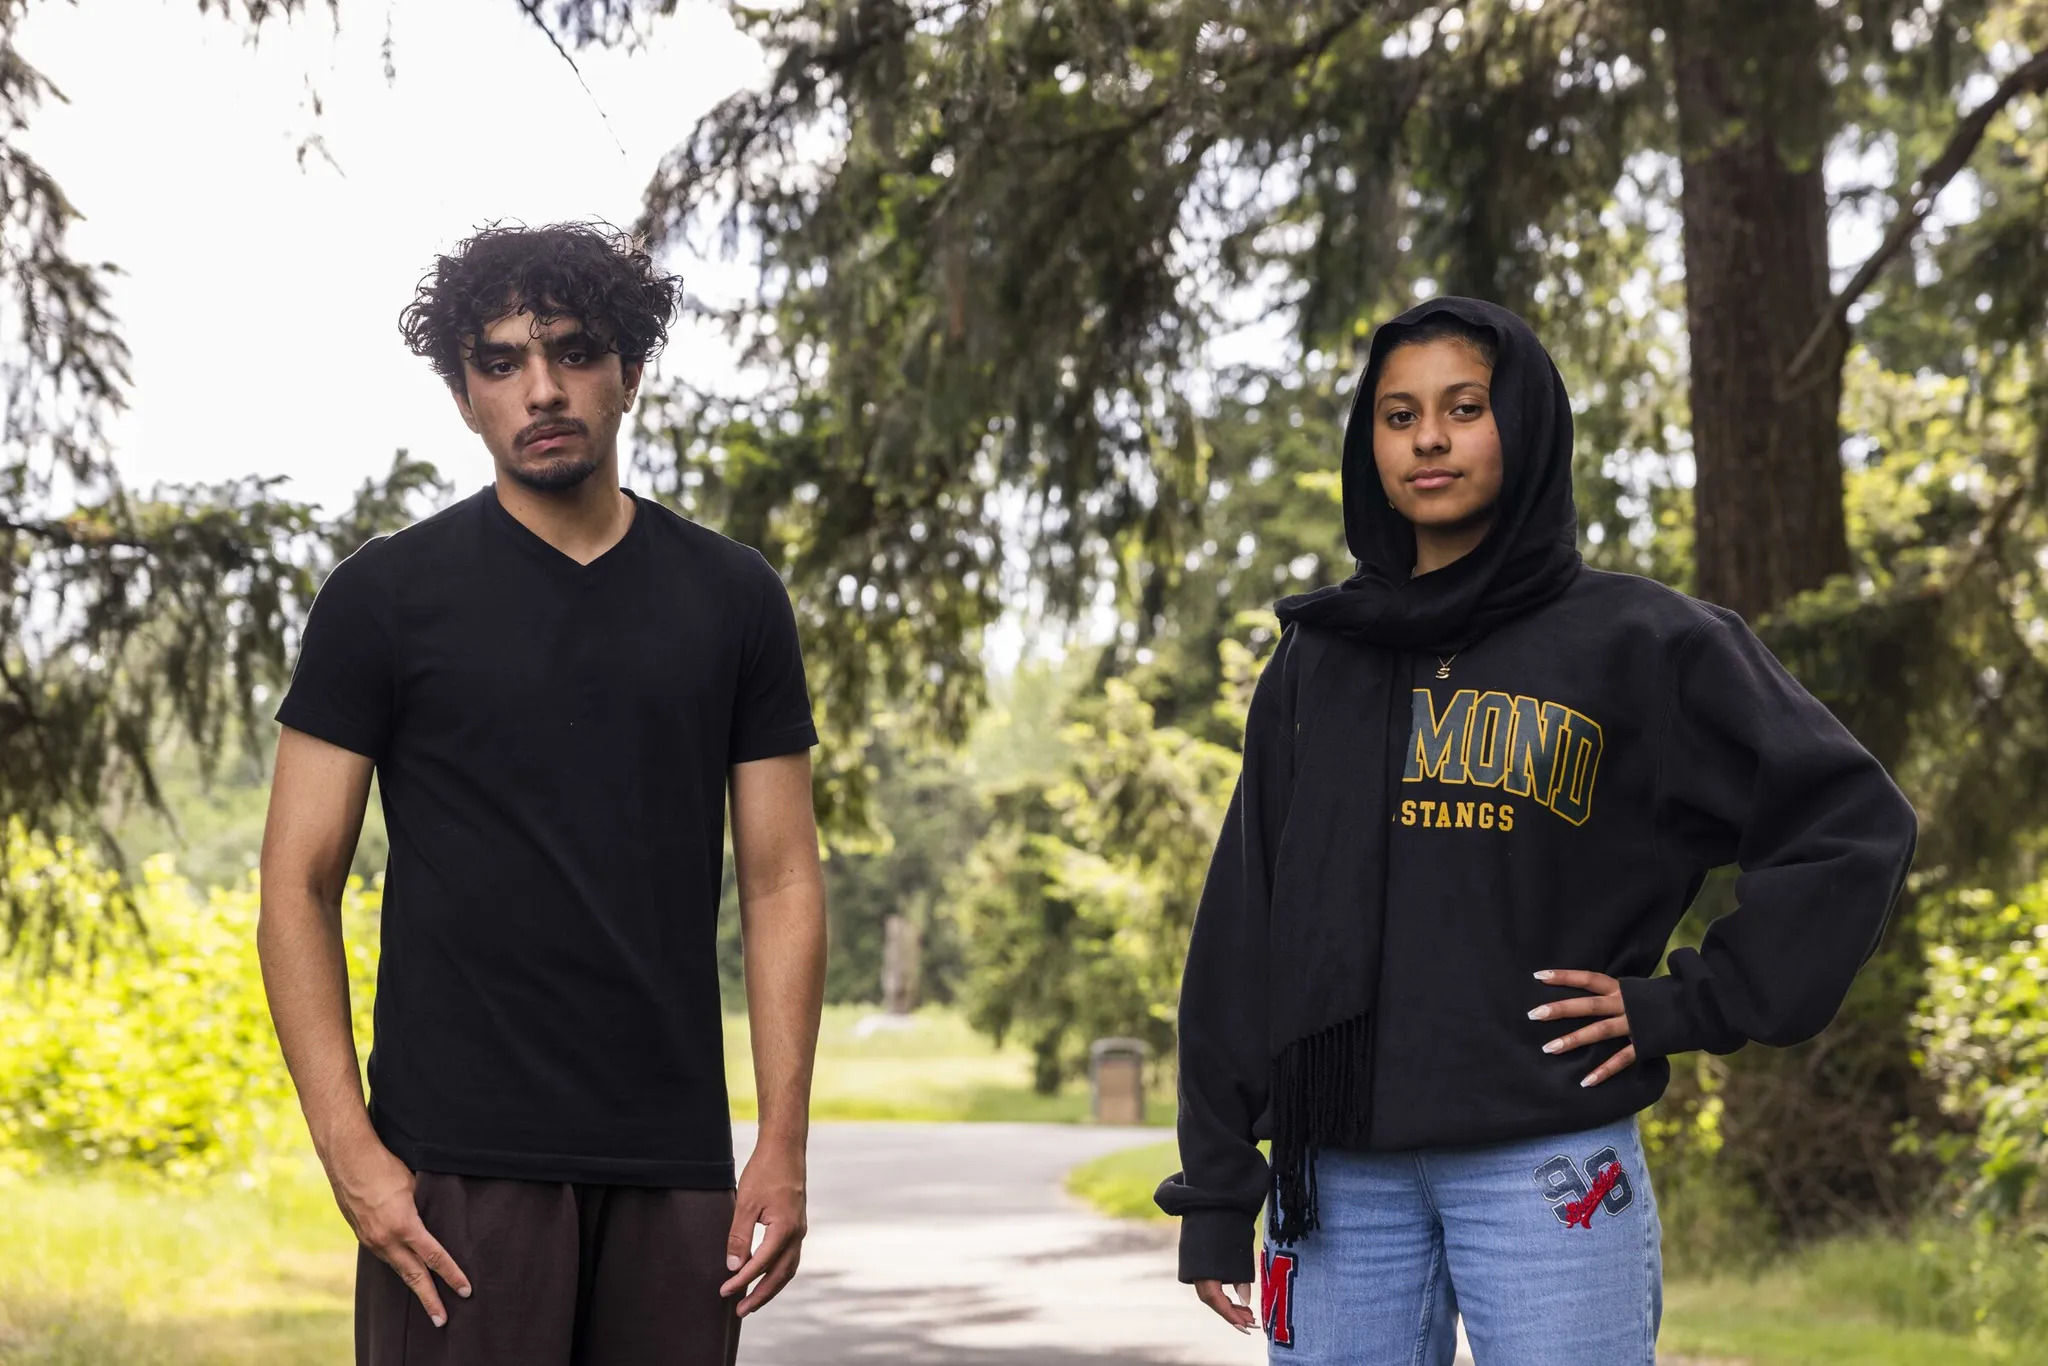 Students ask Lake Washington district to recognize Eid as school holiday